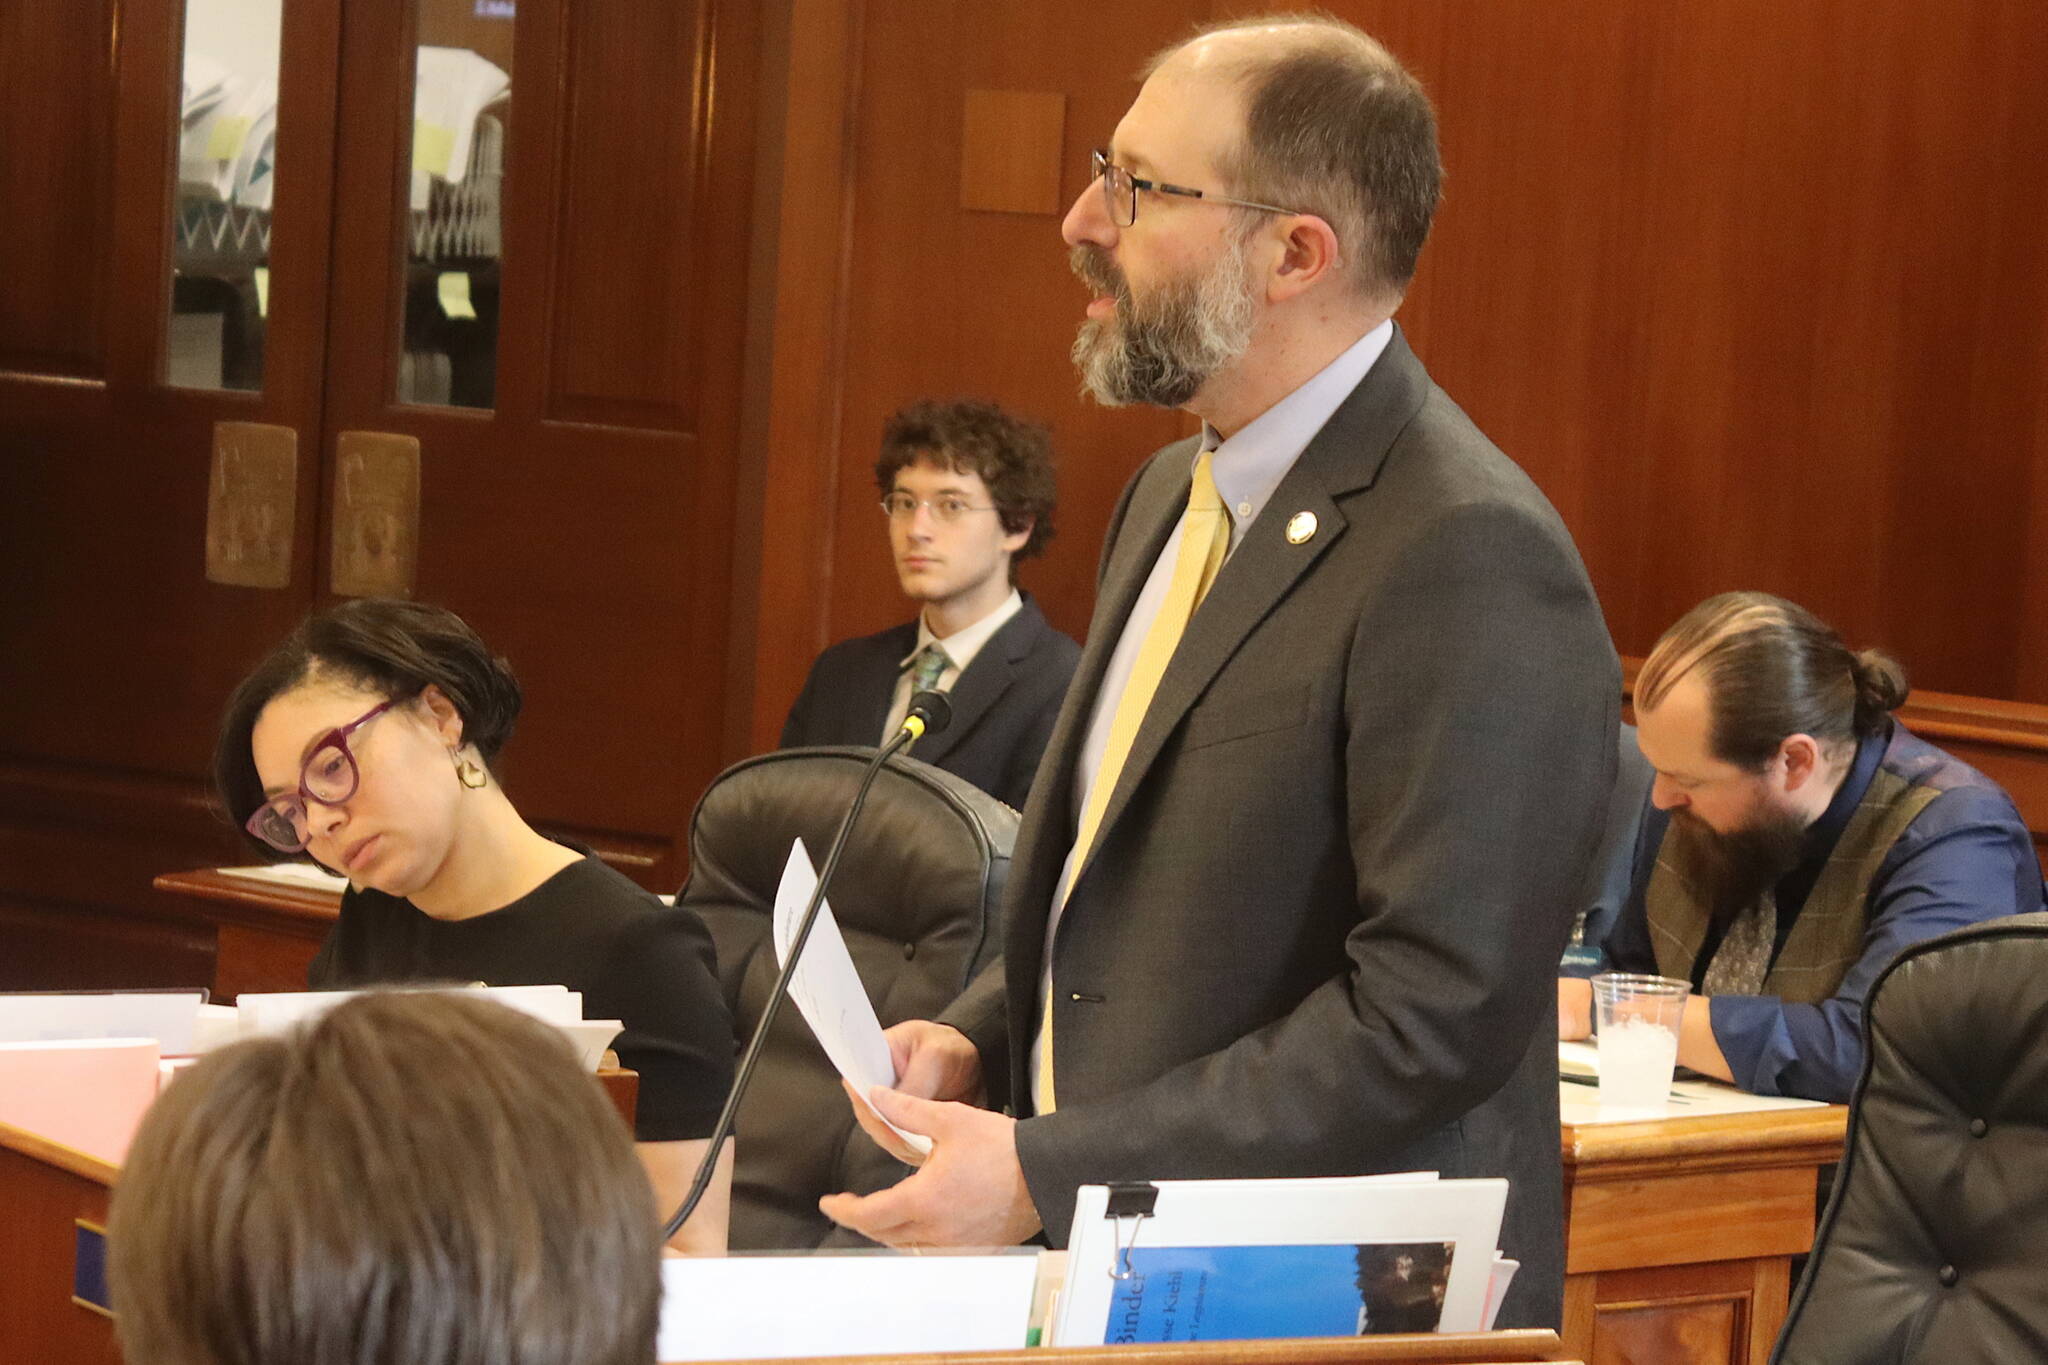 State Sen. Jesse Kiehl, D-Juneau, discusses his bill banning “forever chemicals” in firefighting foams just before it received final passage by the Alaska Legislature on Wednesday. (Mark Sabbatini / Juneau Empire)